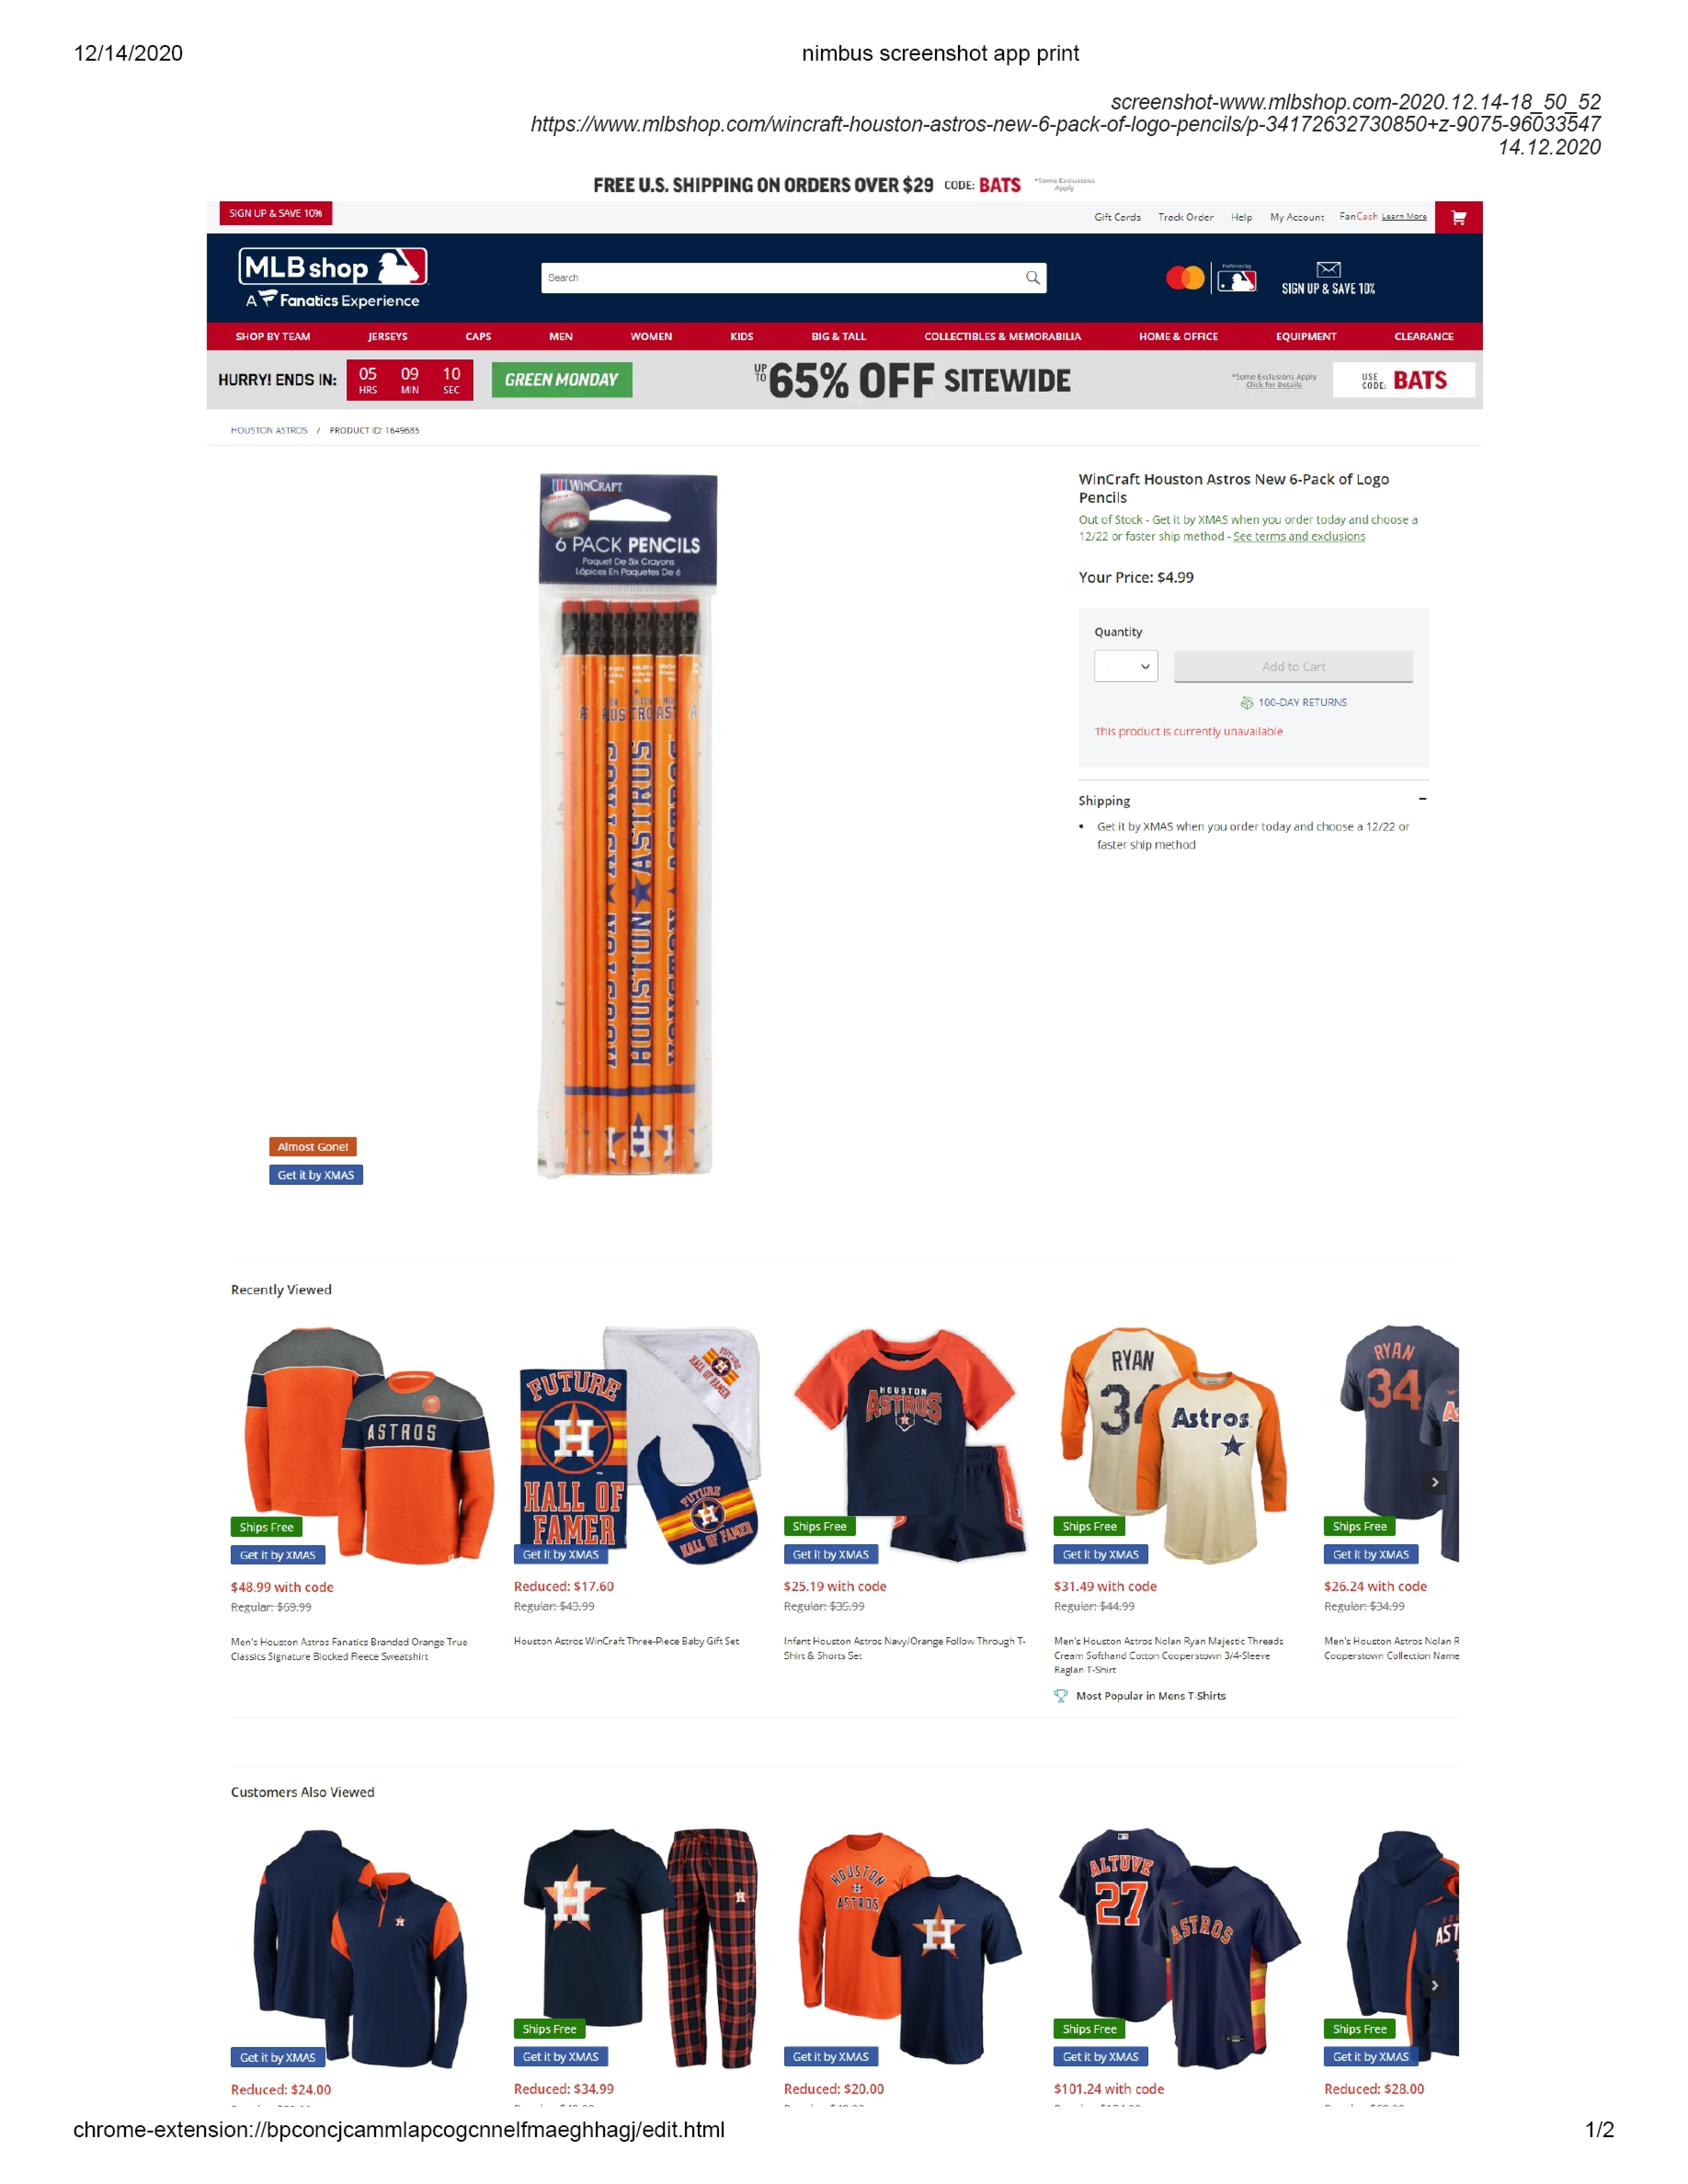 Houston Astros - Which promotion or giveaway are you